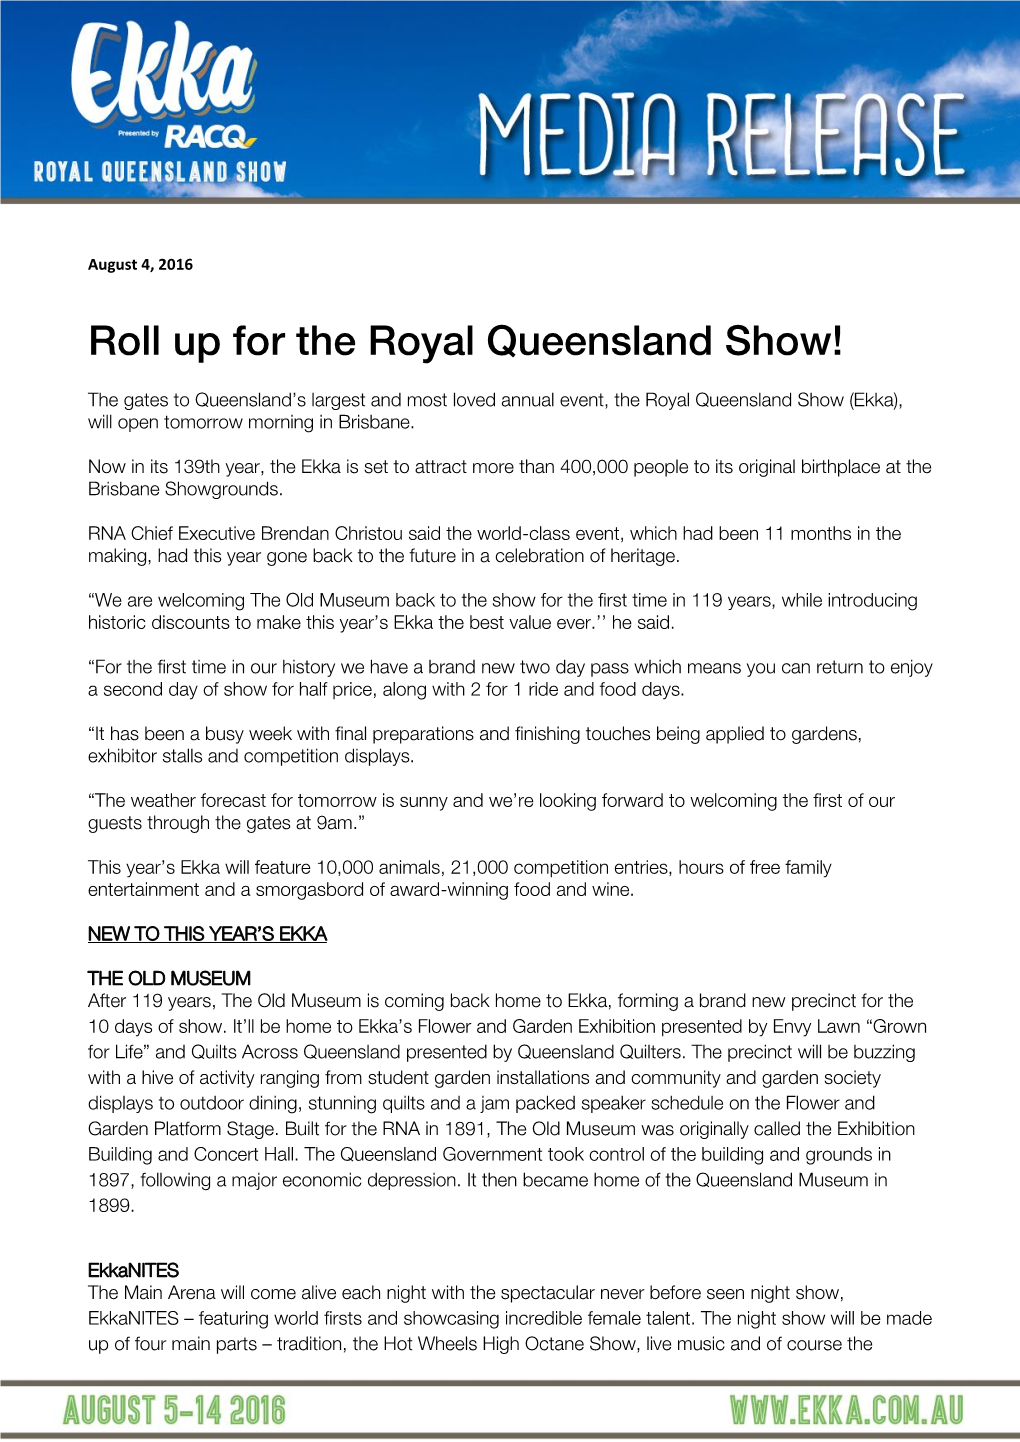 Roll up for the Royal Queensland Show!